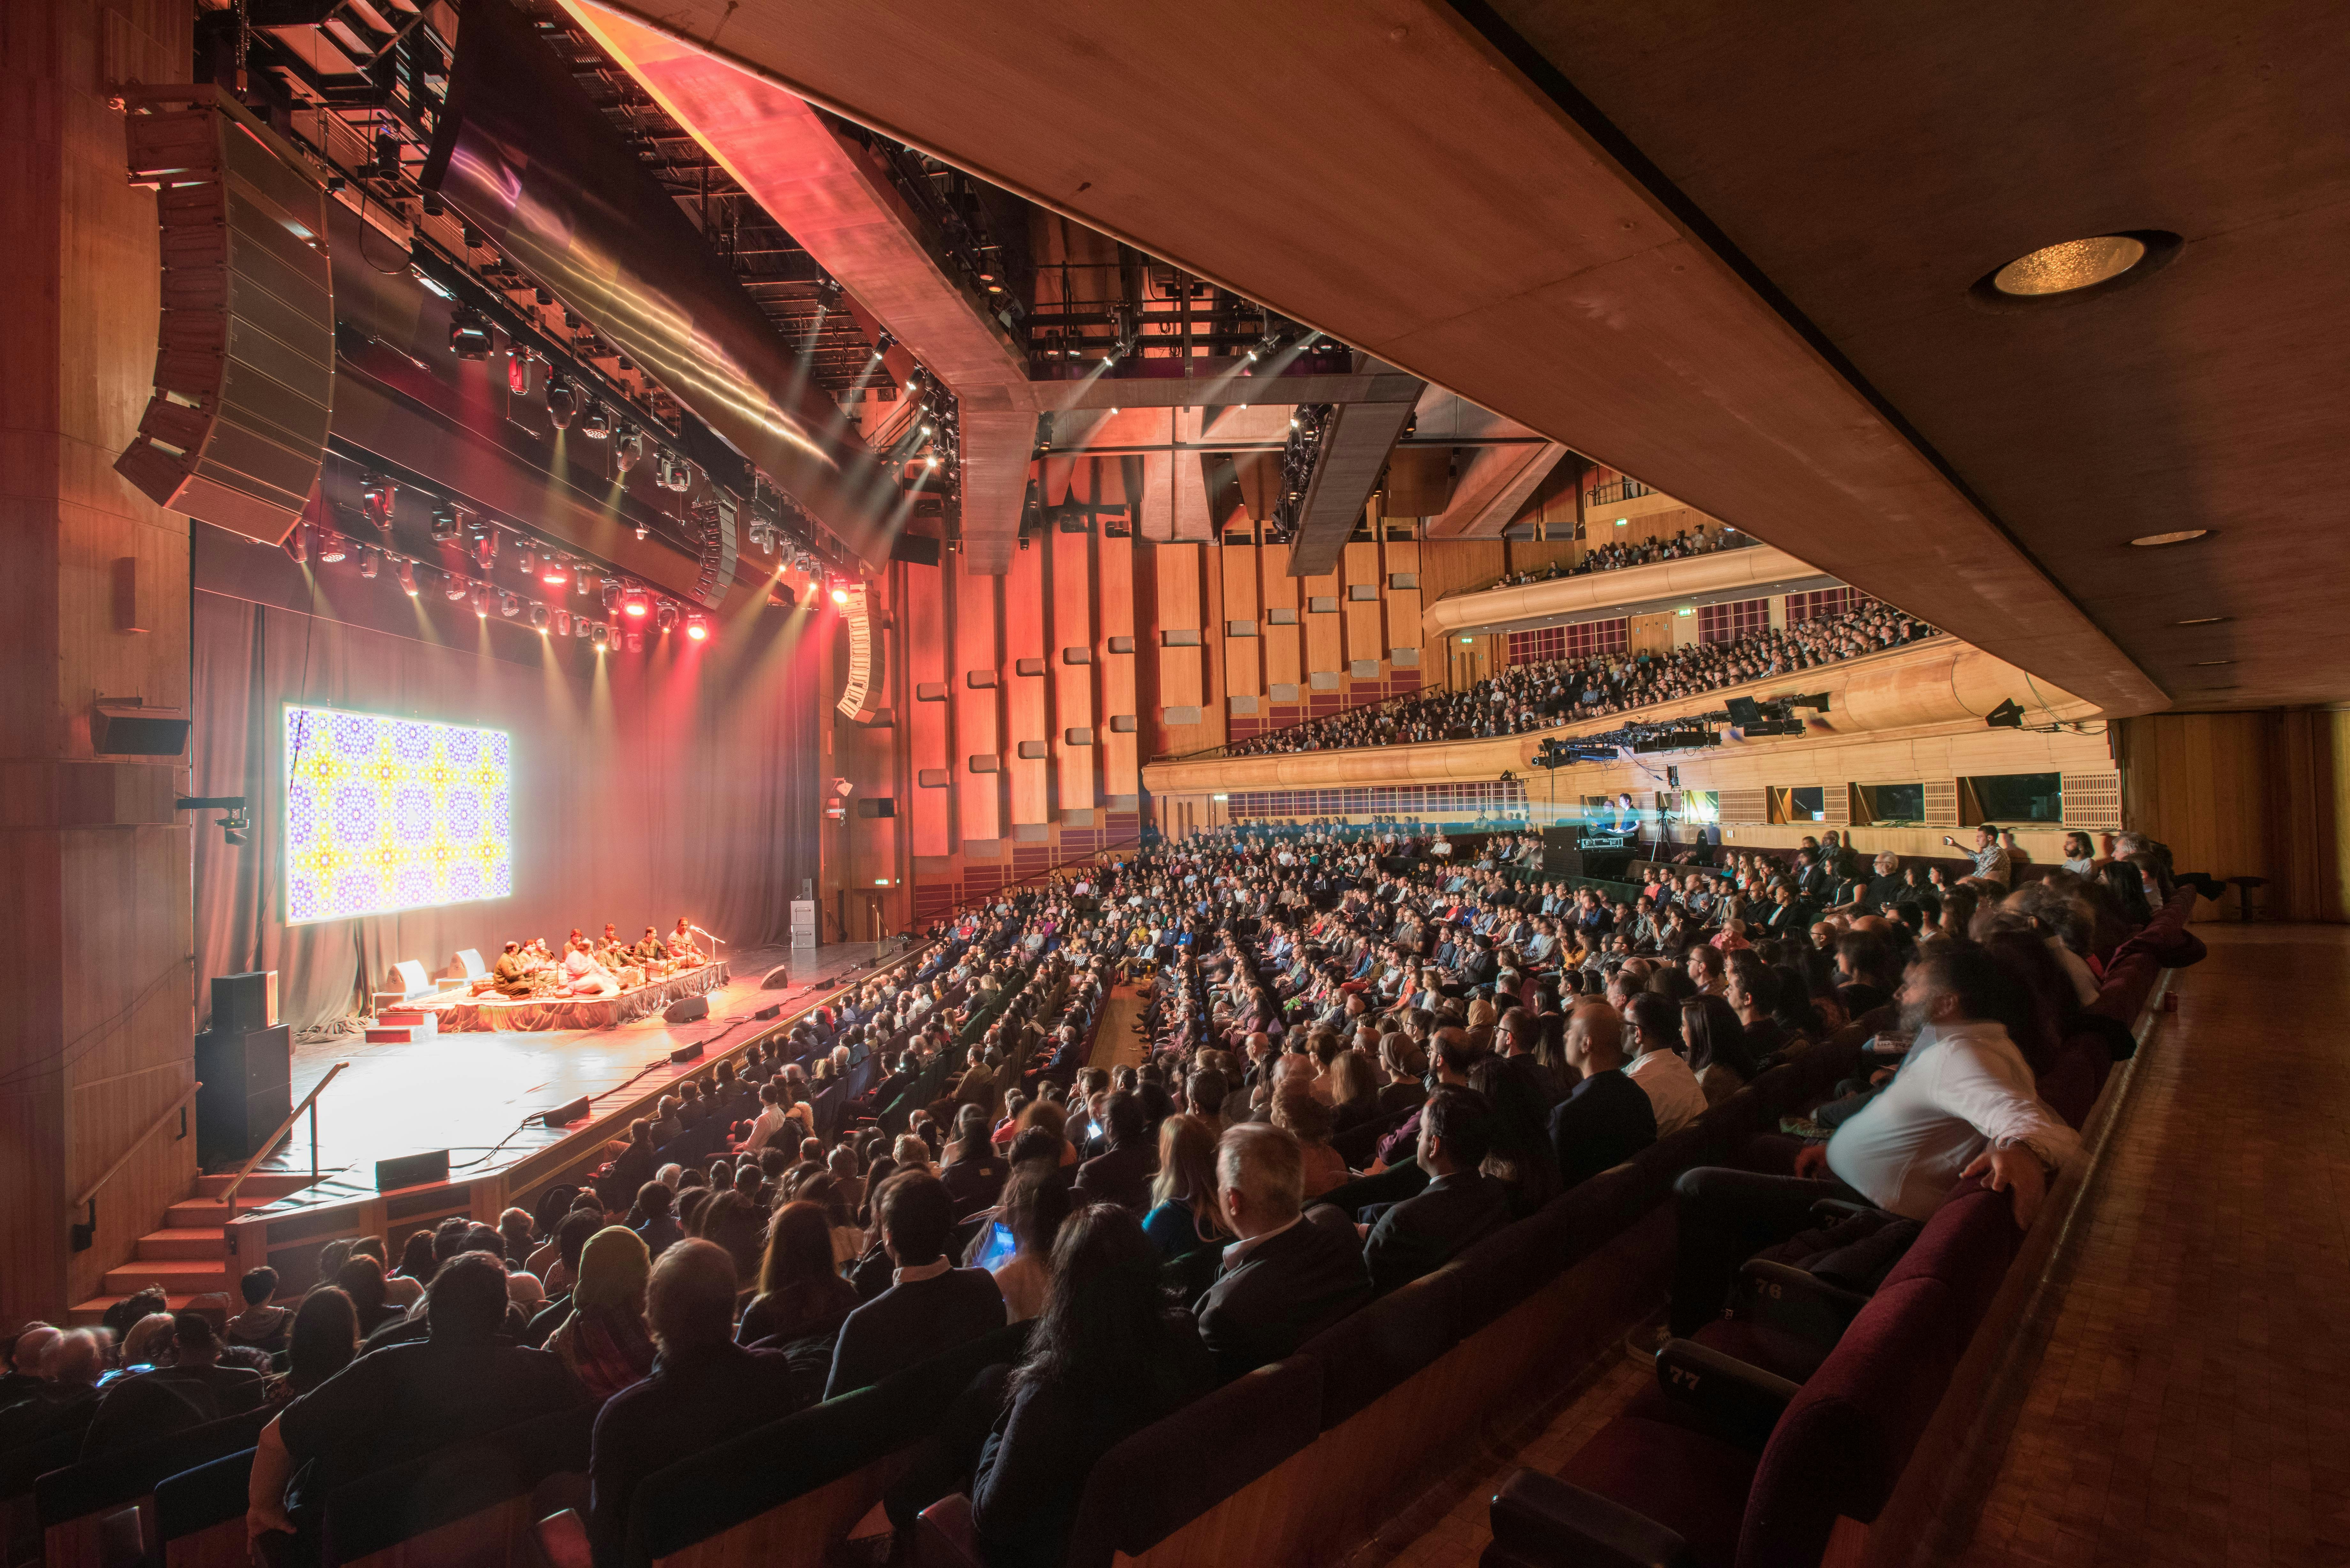 Interior of Barbican Hall in London, decked out in blond wood.